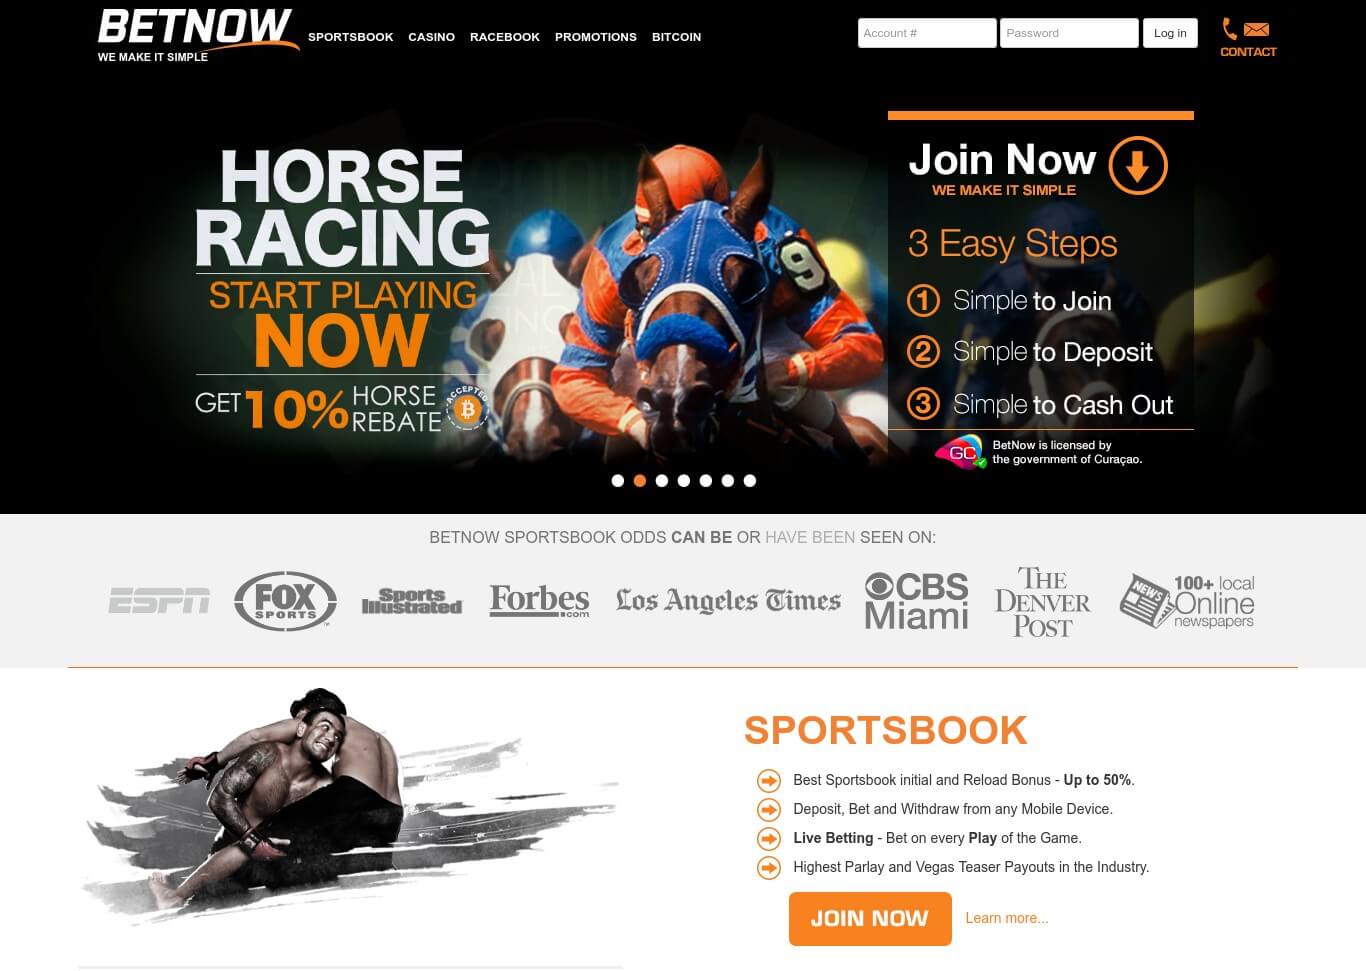 BetNow Sportsbook Review 2020